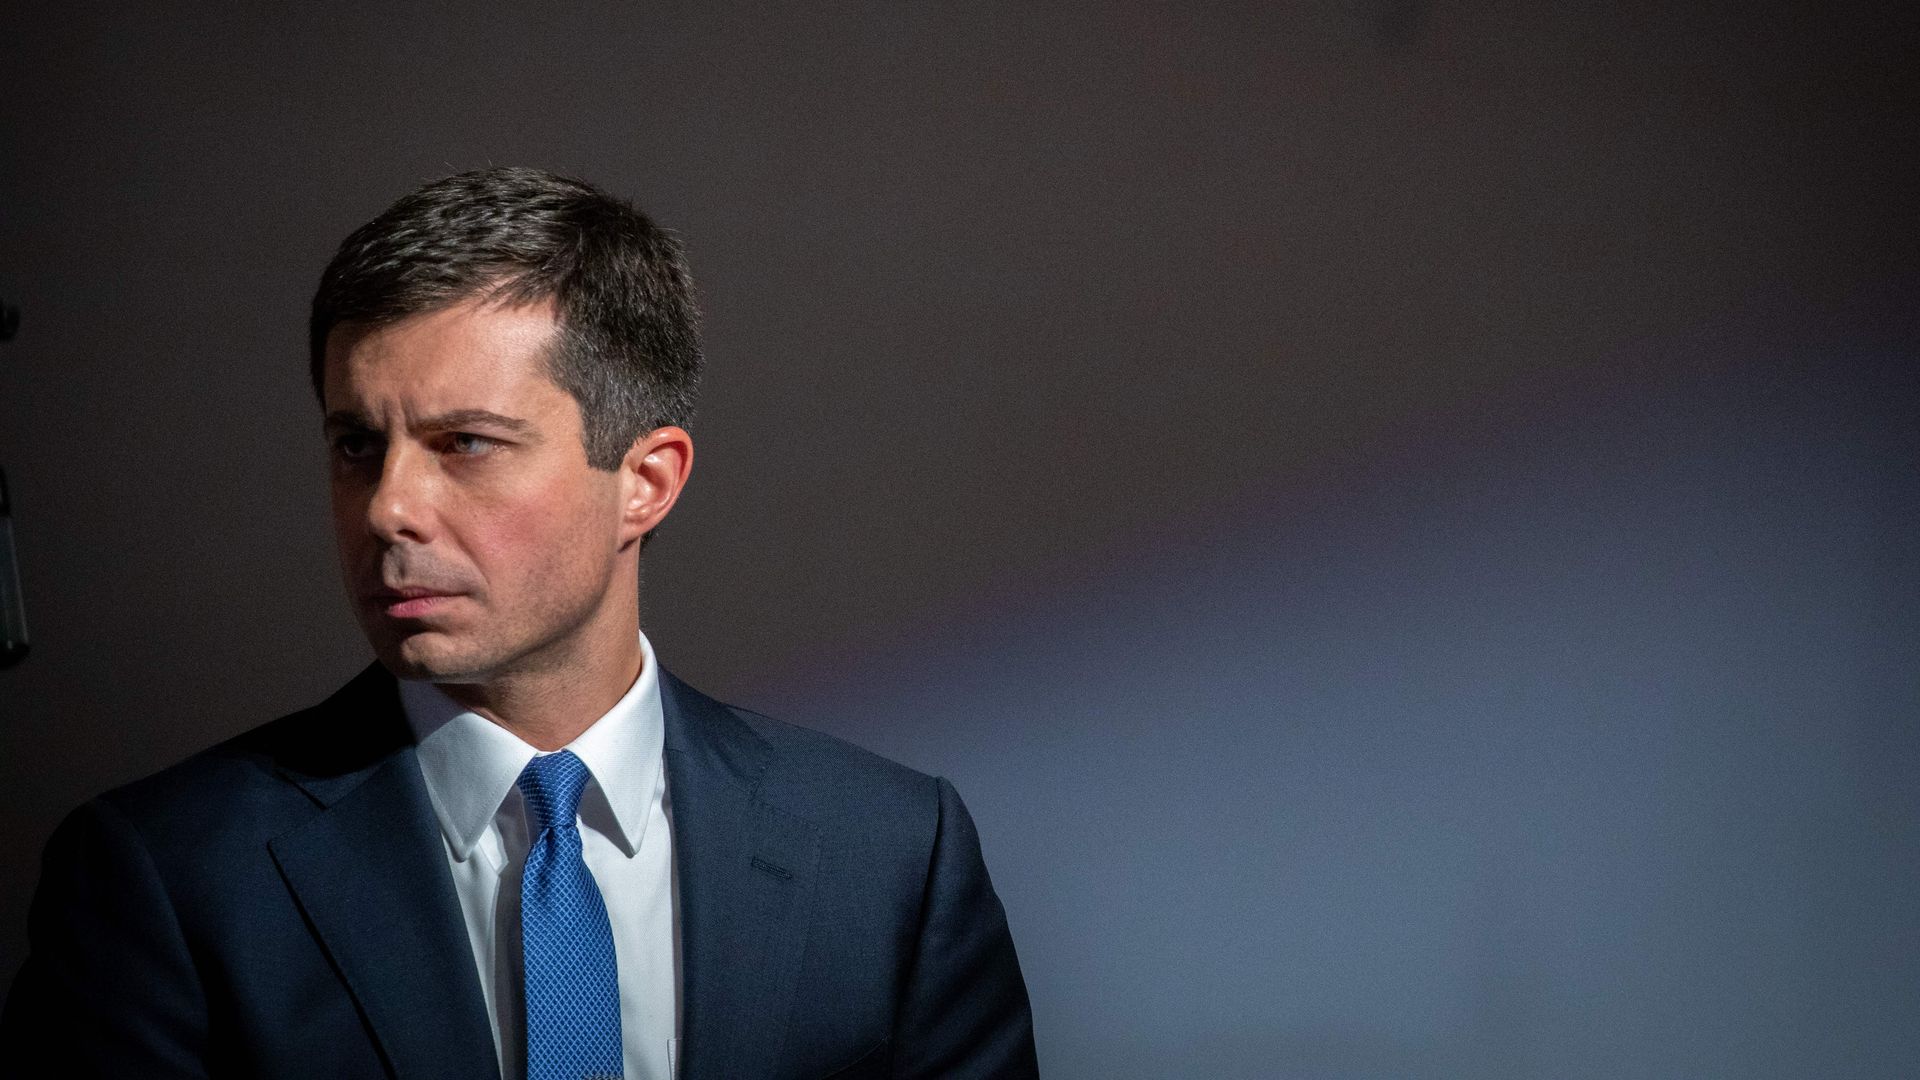 In this image, Buttigieg stands in a suit and tie.